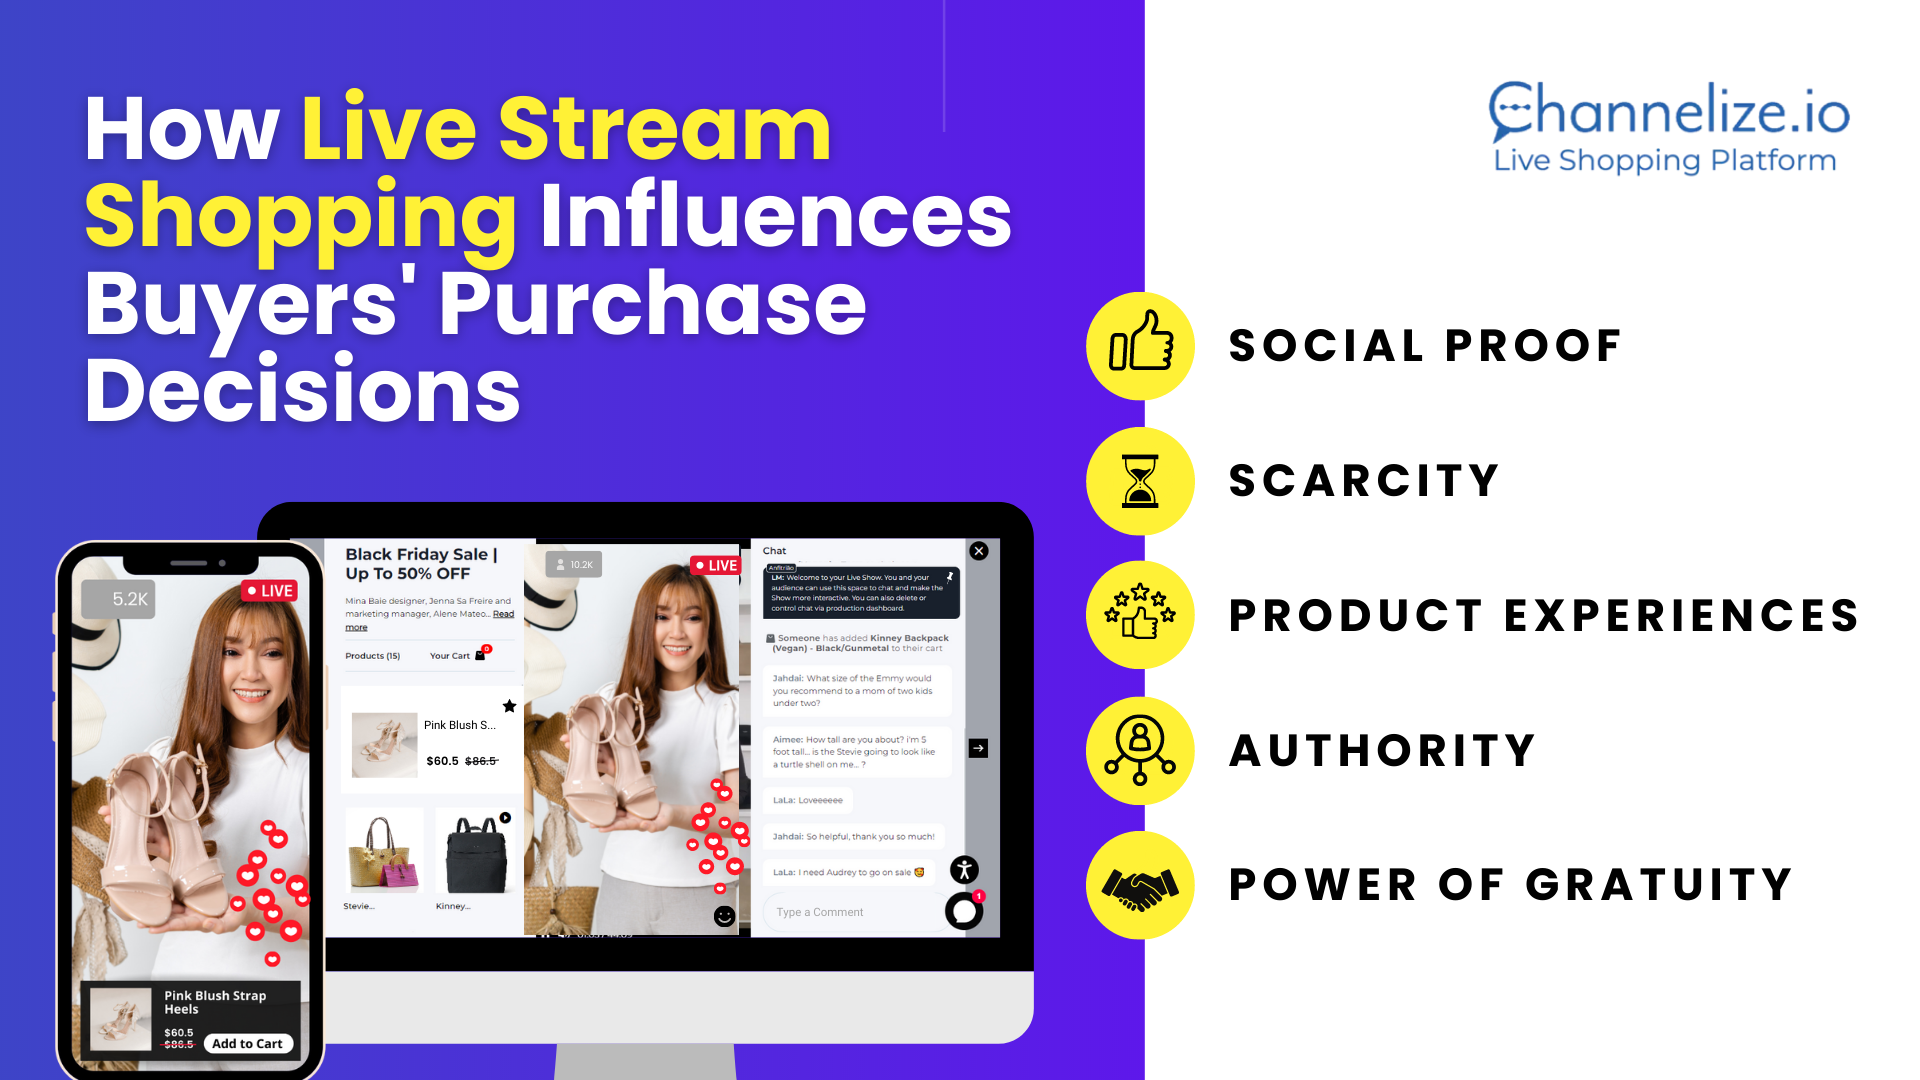 How Live Stream Shopping Influences Buyers’ Purchase Decisions